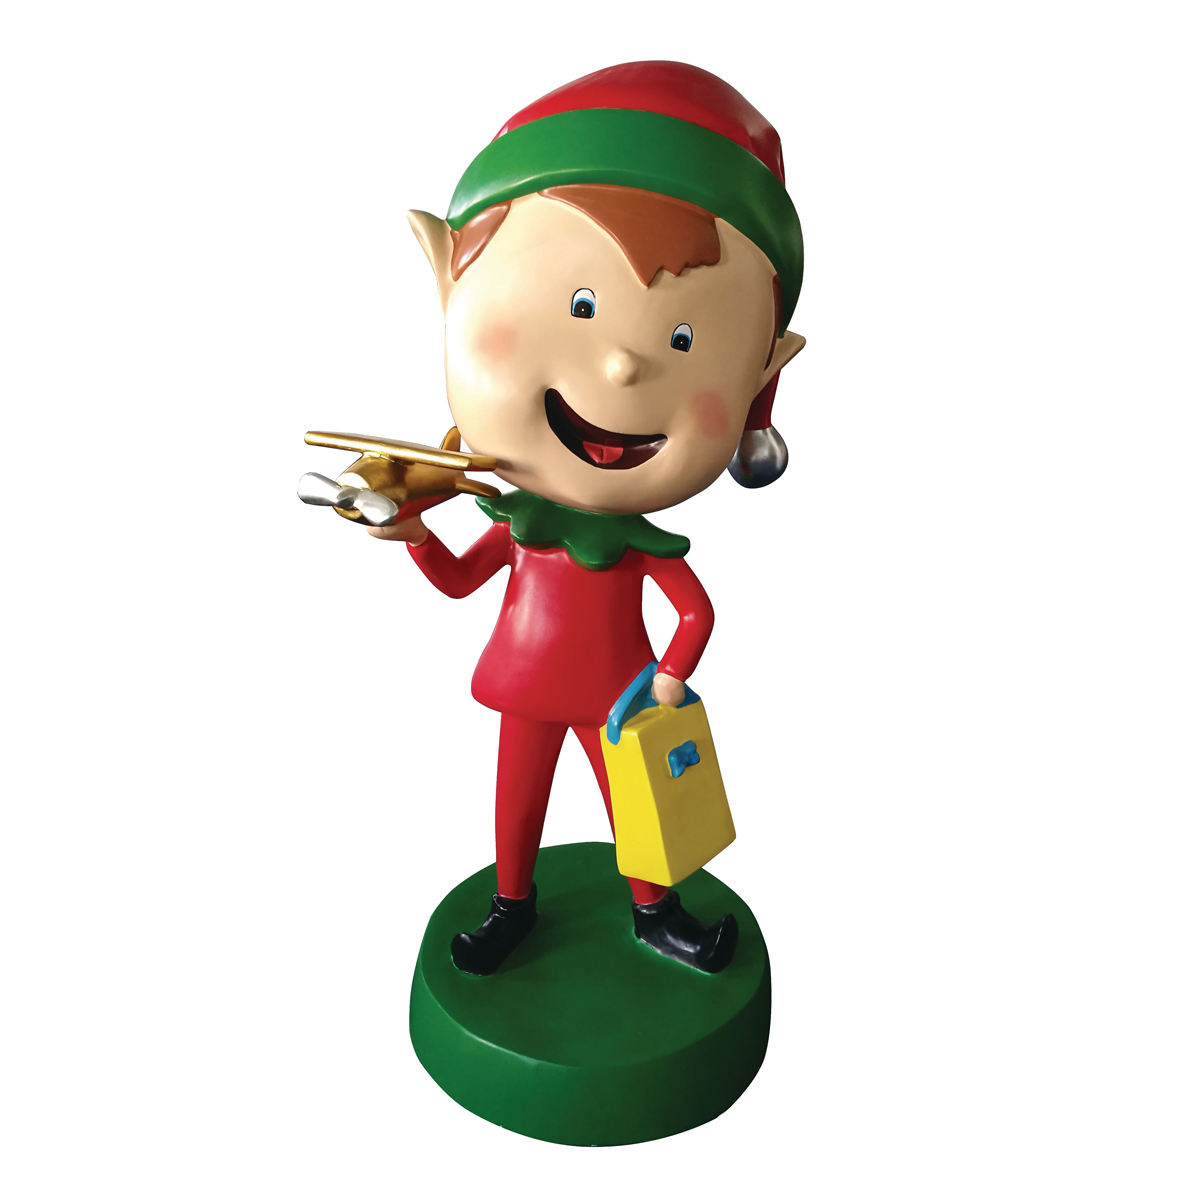 Elf with Toy Airplane - 4.5ft Tall